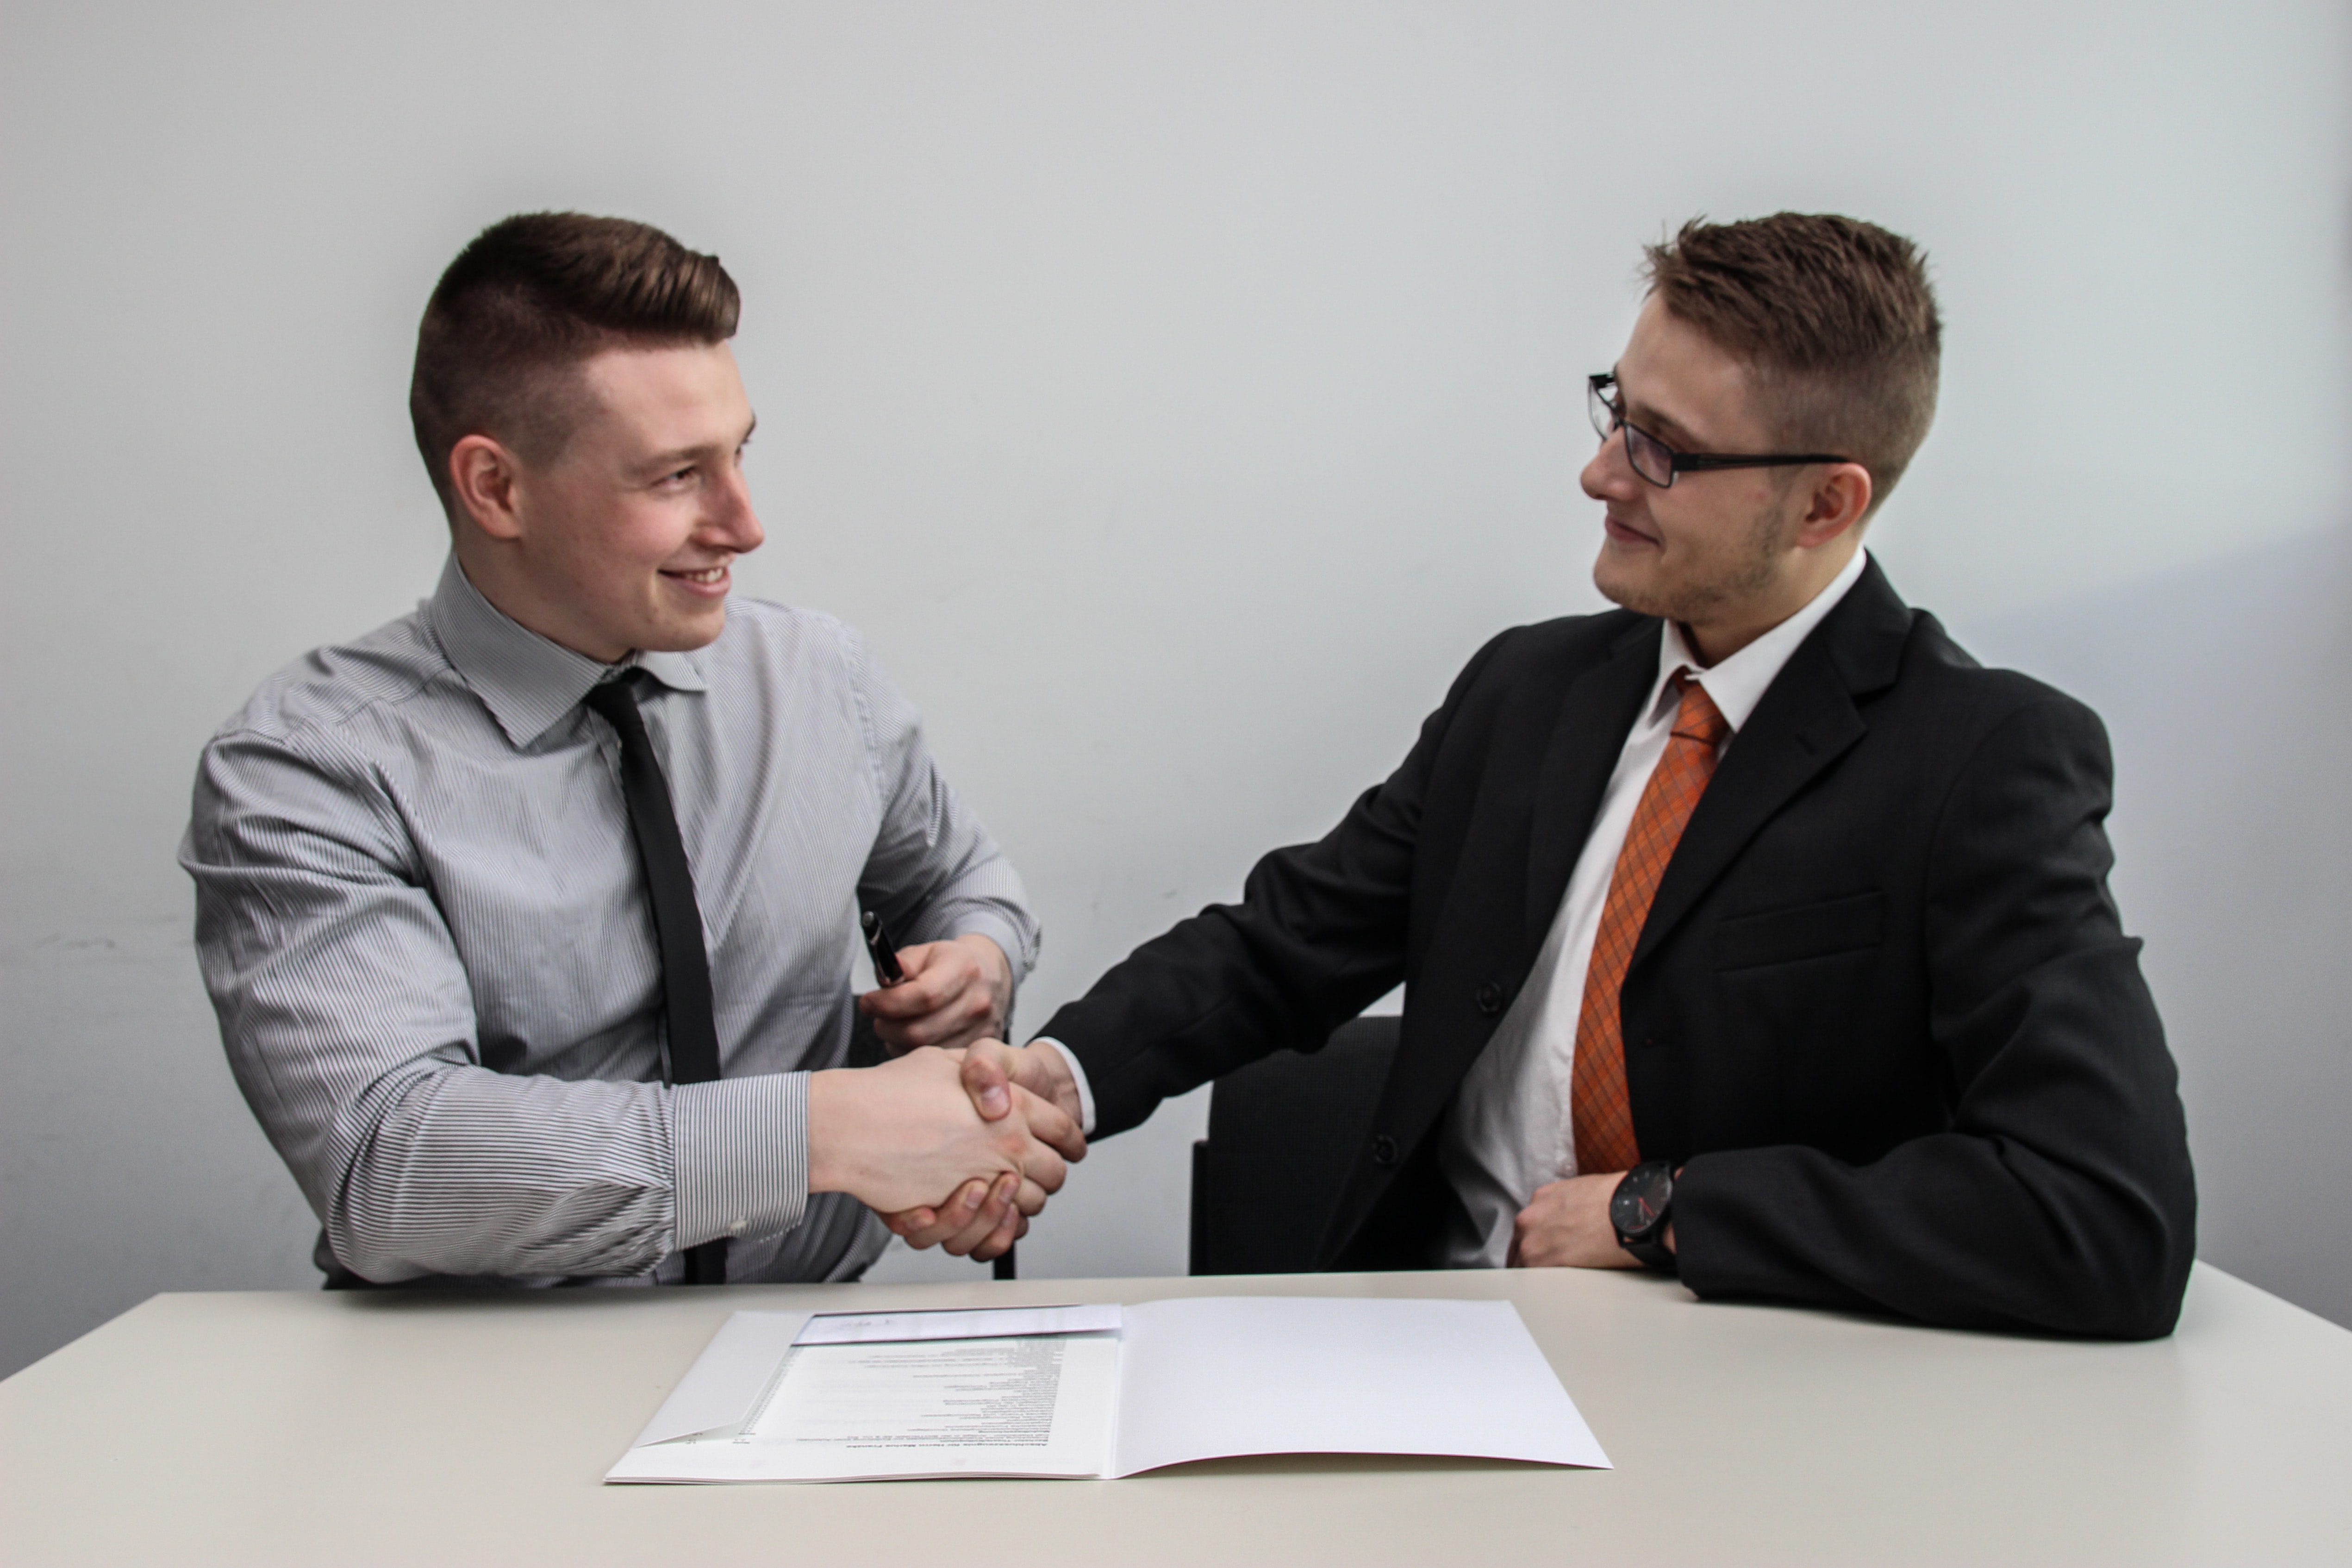 two employeesfacing each other while shake hands and smiling while reviewing employee benefits package